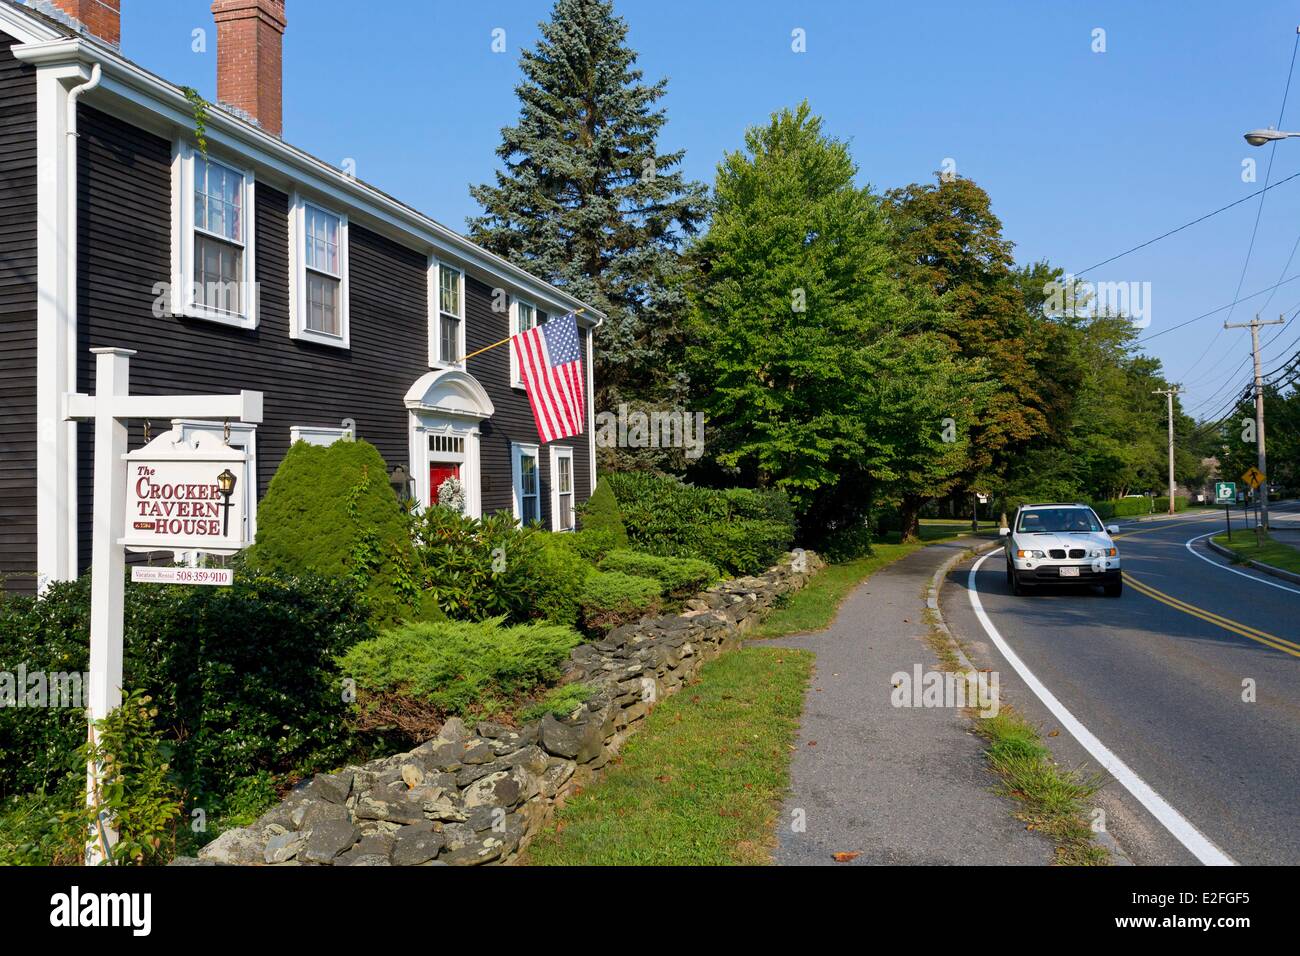 United States, Massachusetts, Cape Cod, Barnstable, The Crocker Tavern House, house to rent Stock Photo